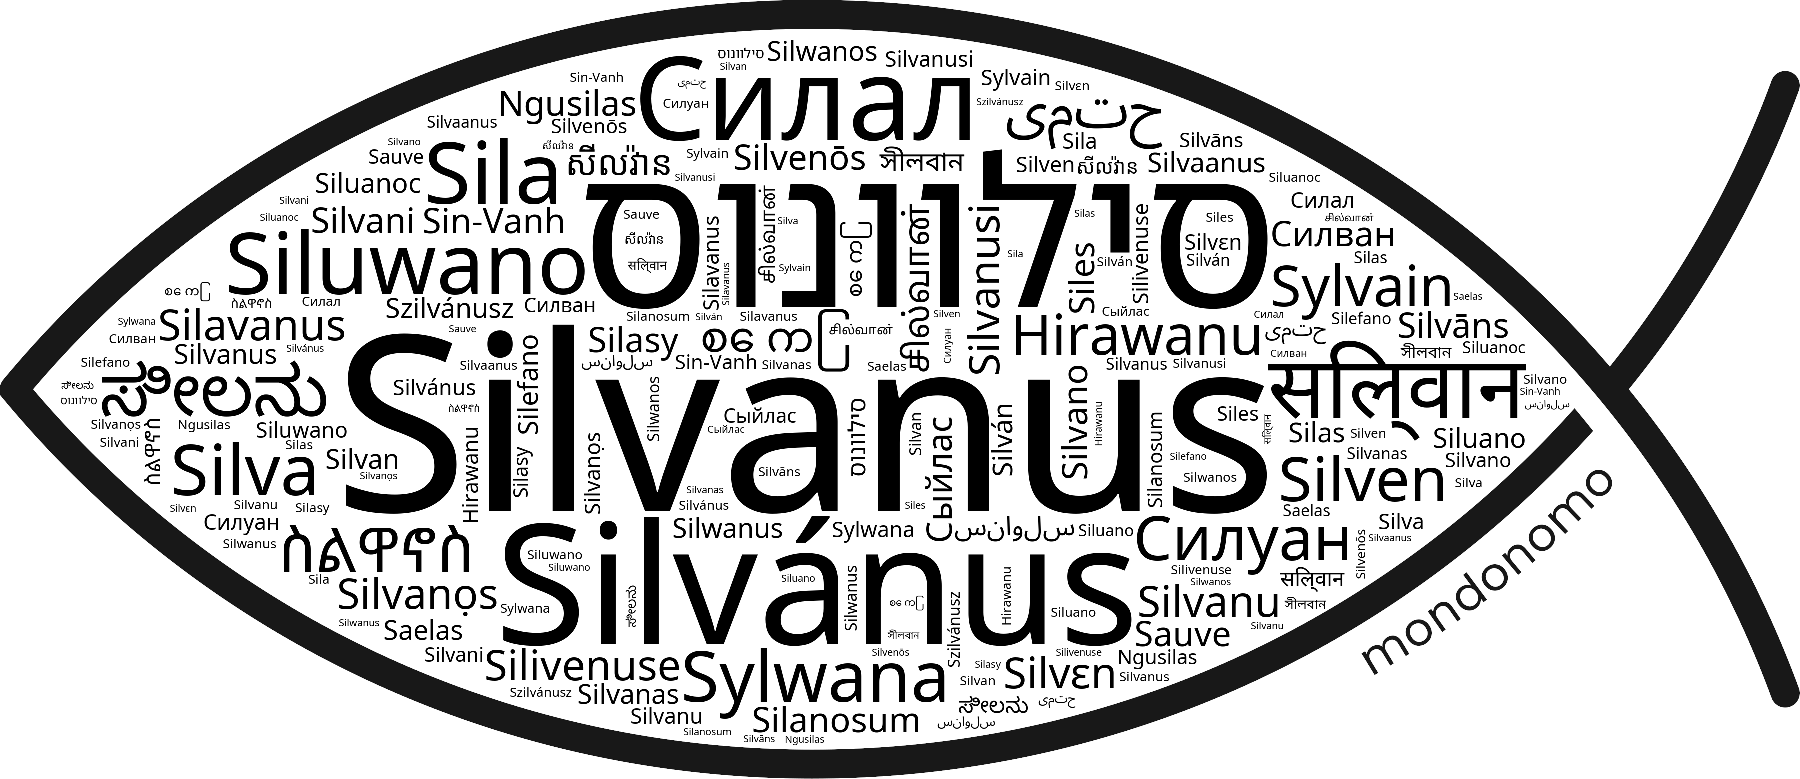 Name Silvanus in the world's Bibles